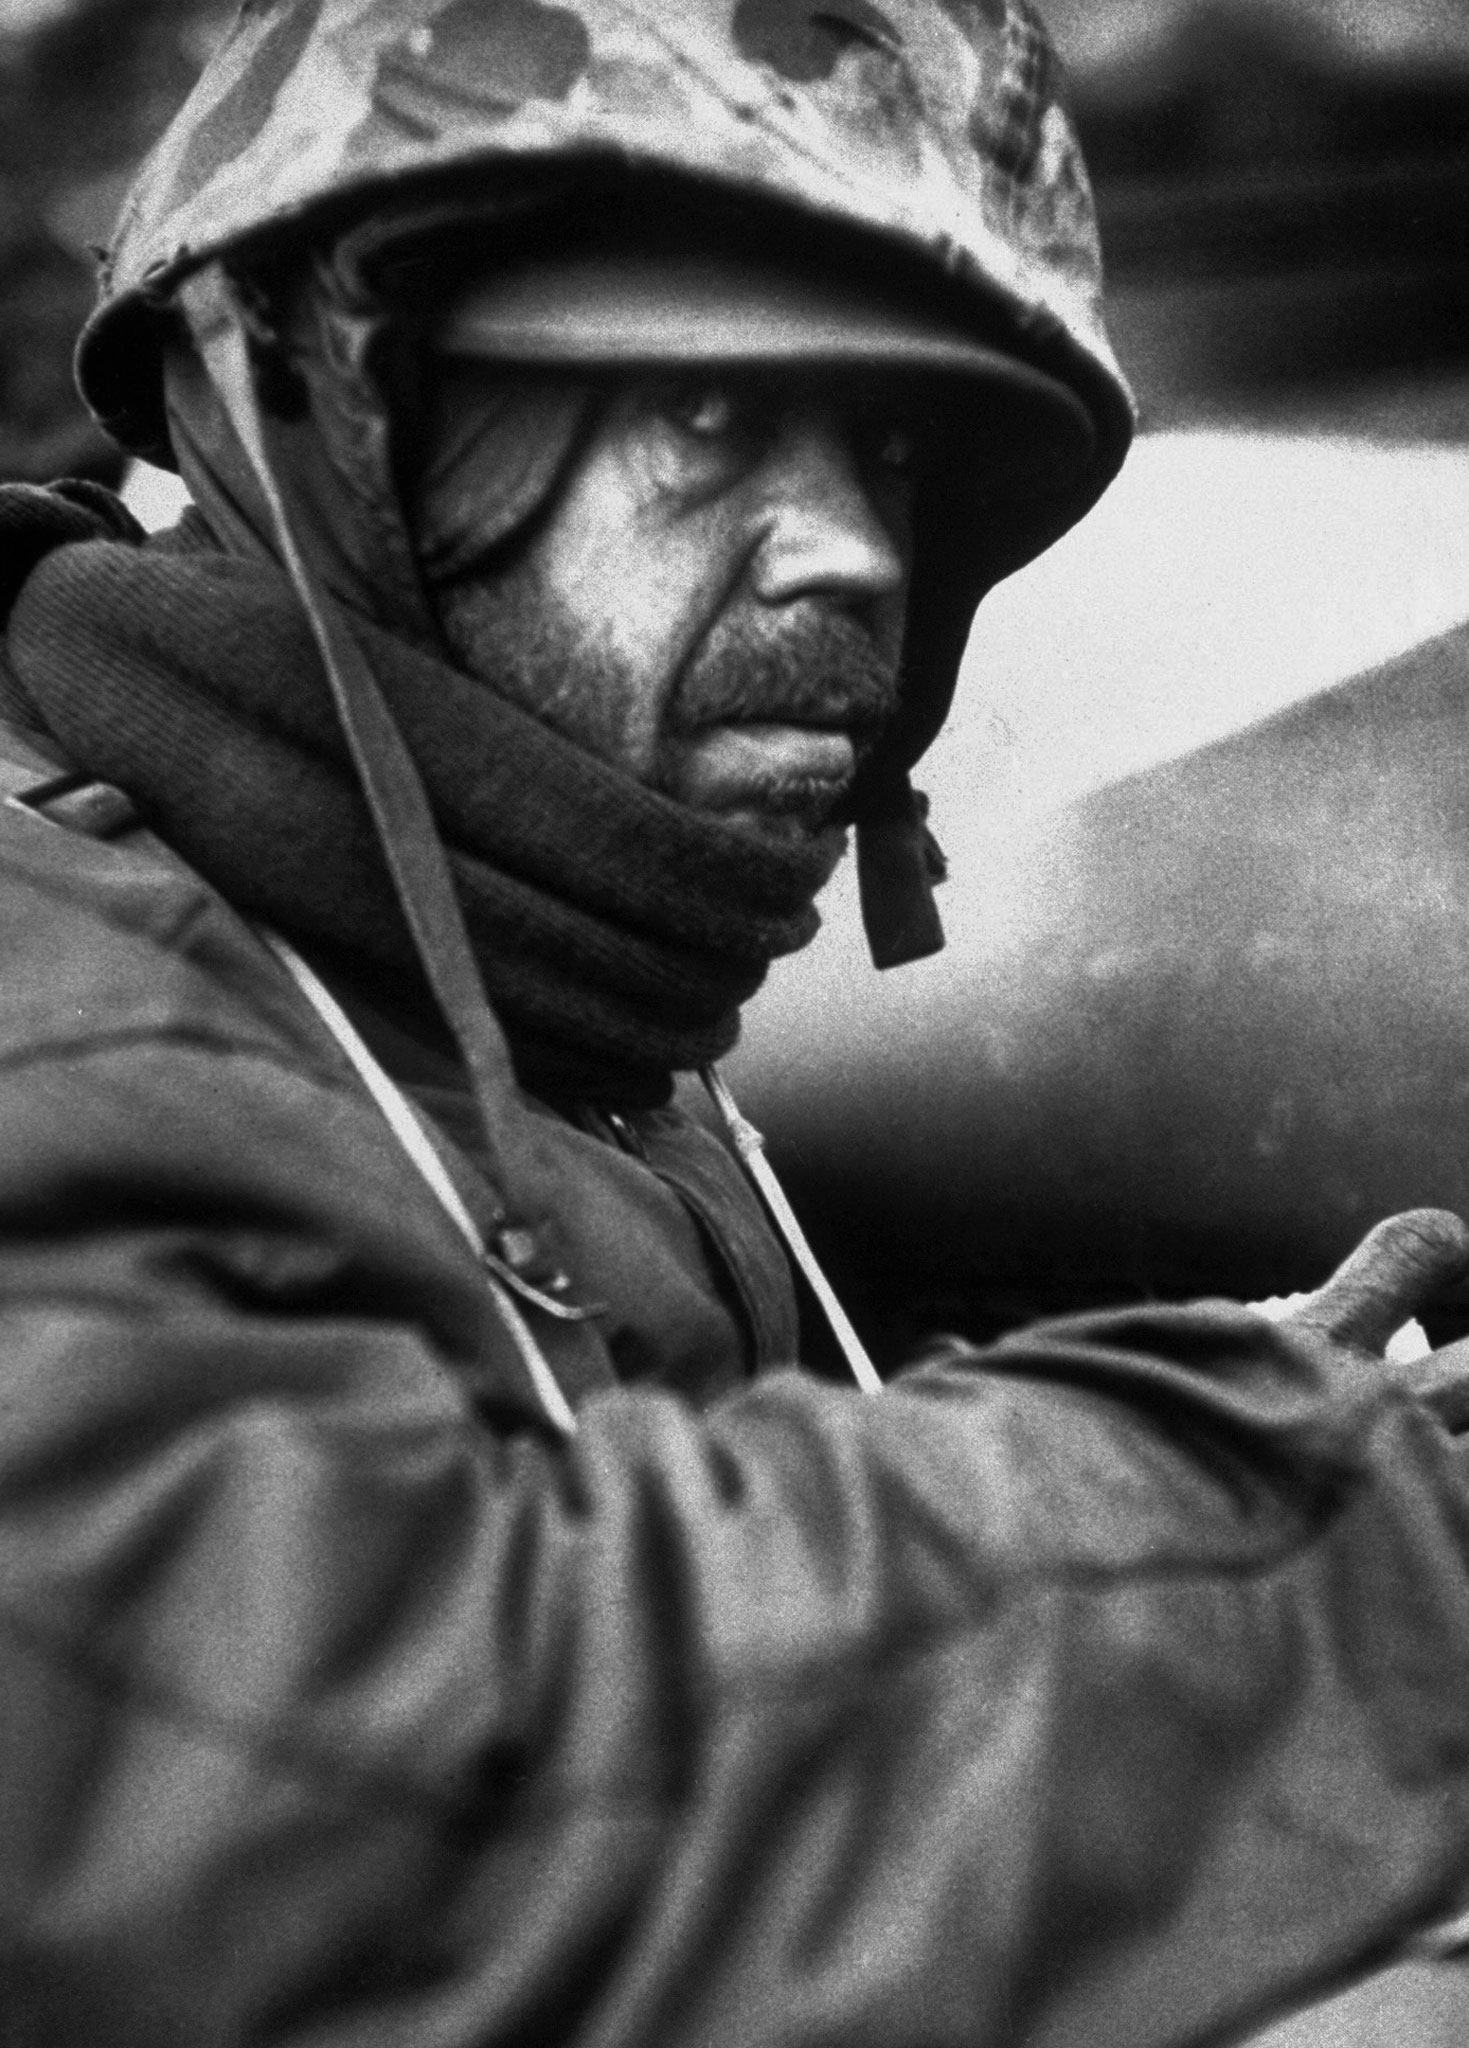 A weary American Marine hooded against the cold during the grim retreat from Chosin Reservoir, Korea, winter 1950.